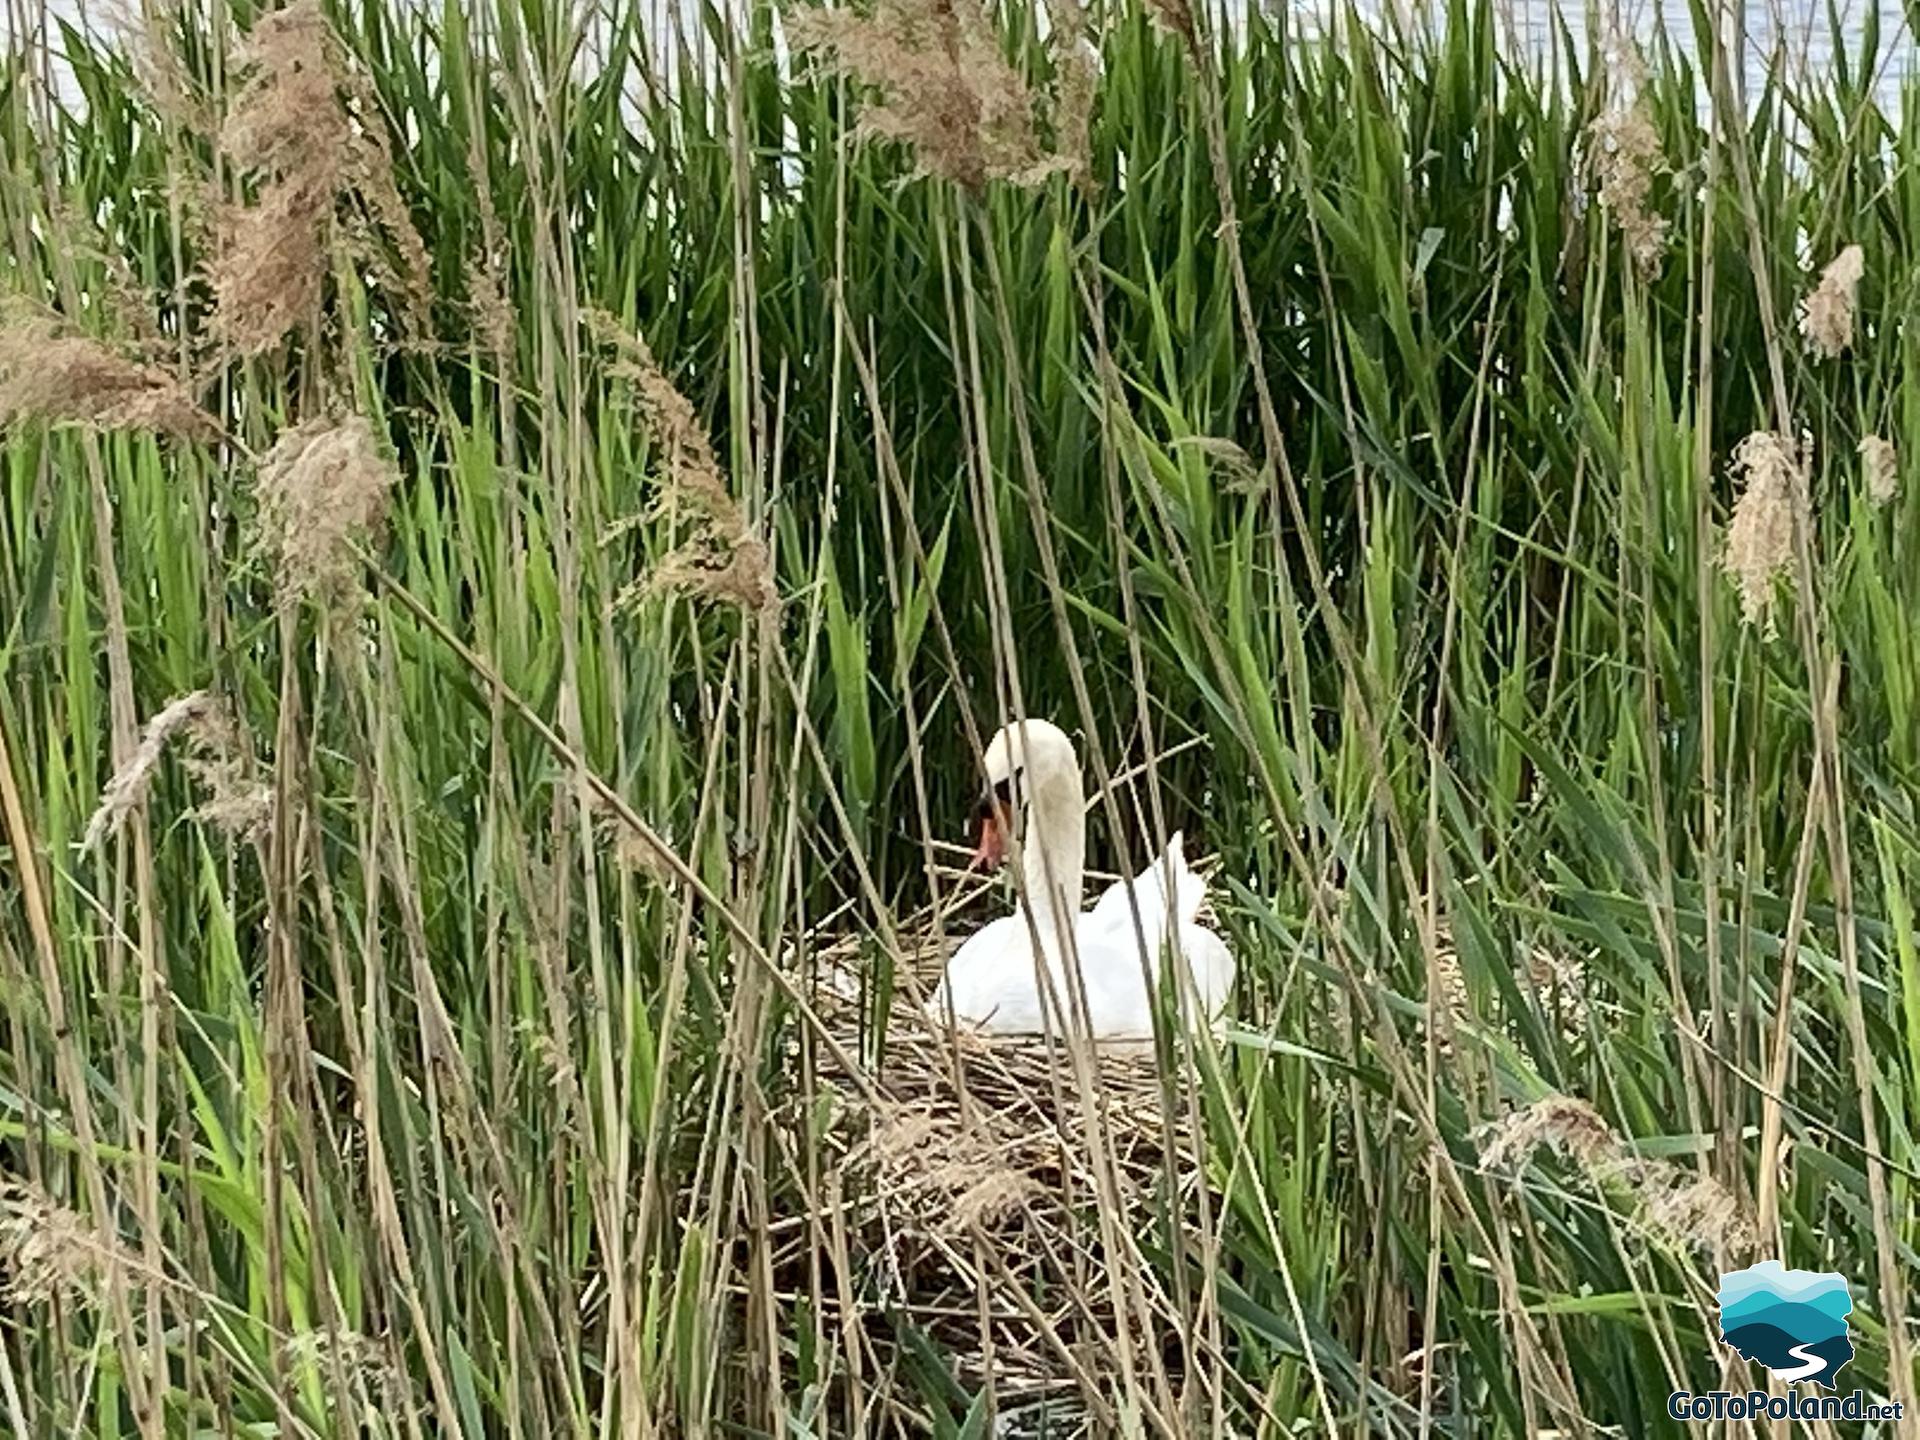 A white swan on the nest by the pond